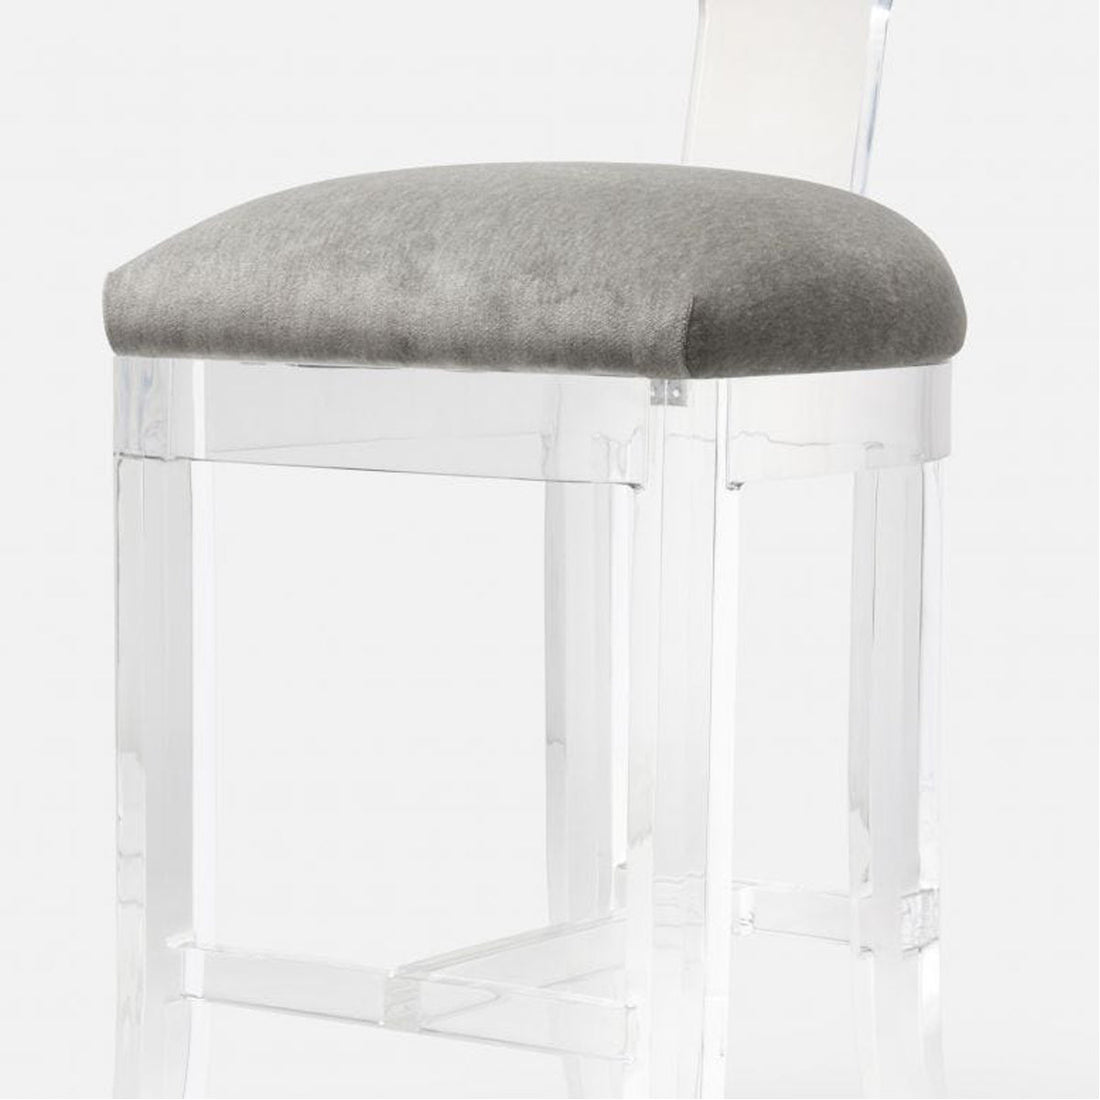 Made Goods Aldercy Clear Acrylic Counter Stool in Bassac Leather